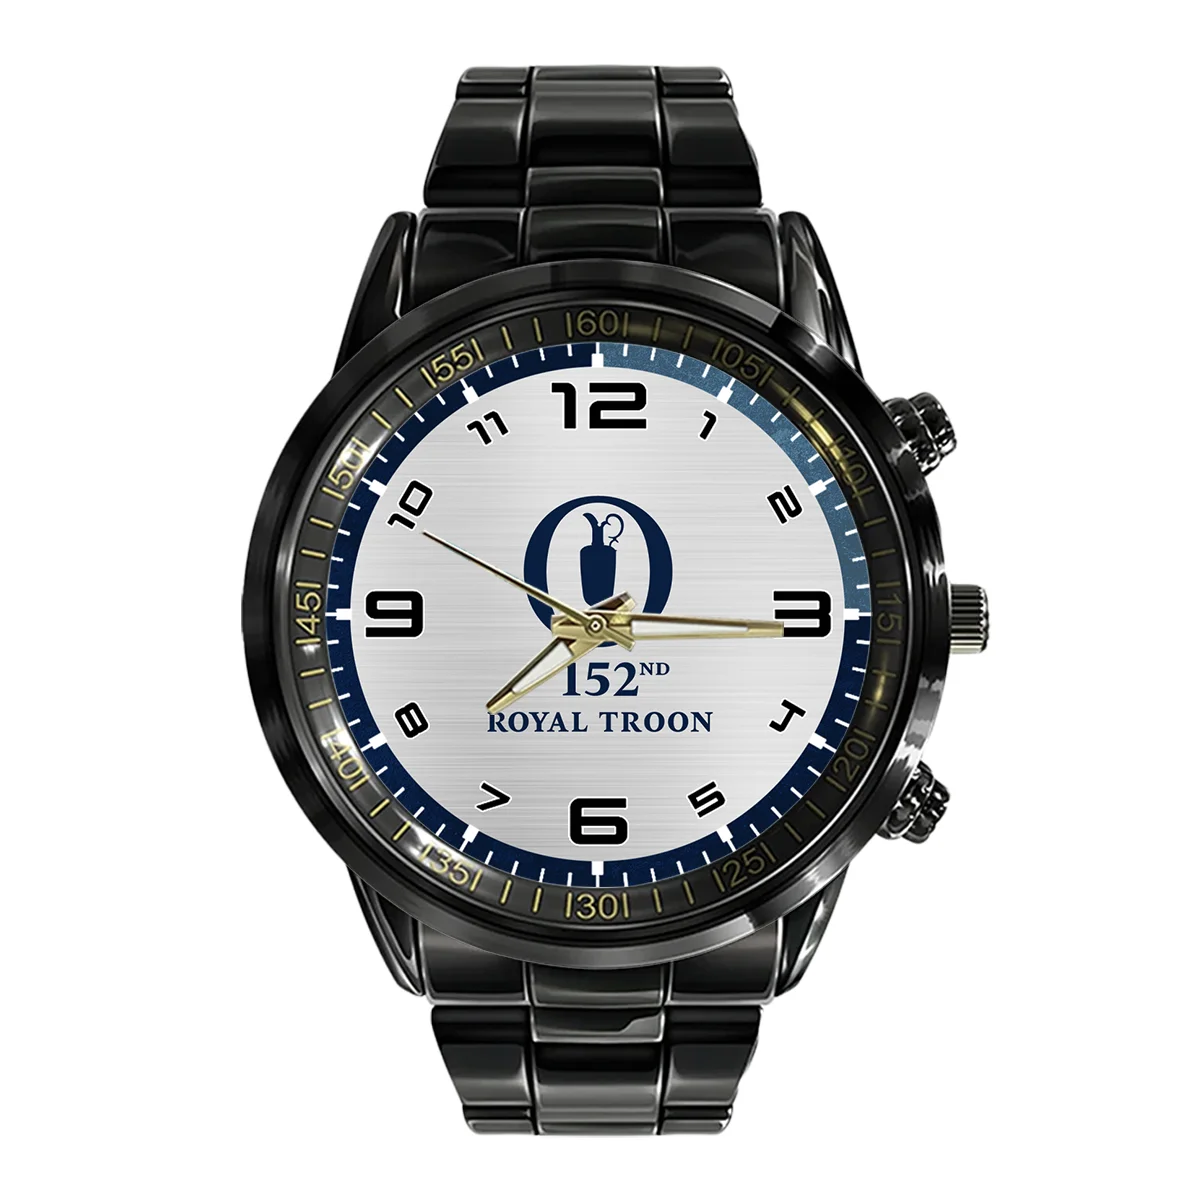 Metalic Pattern Masters Tournament Black Stainless Steel Watch Style Classic